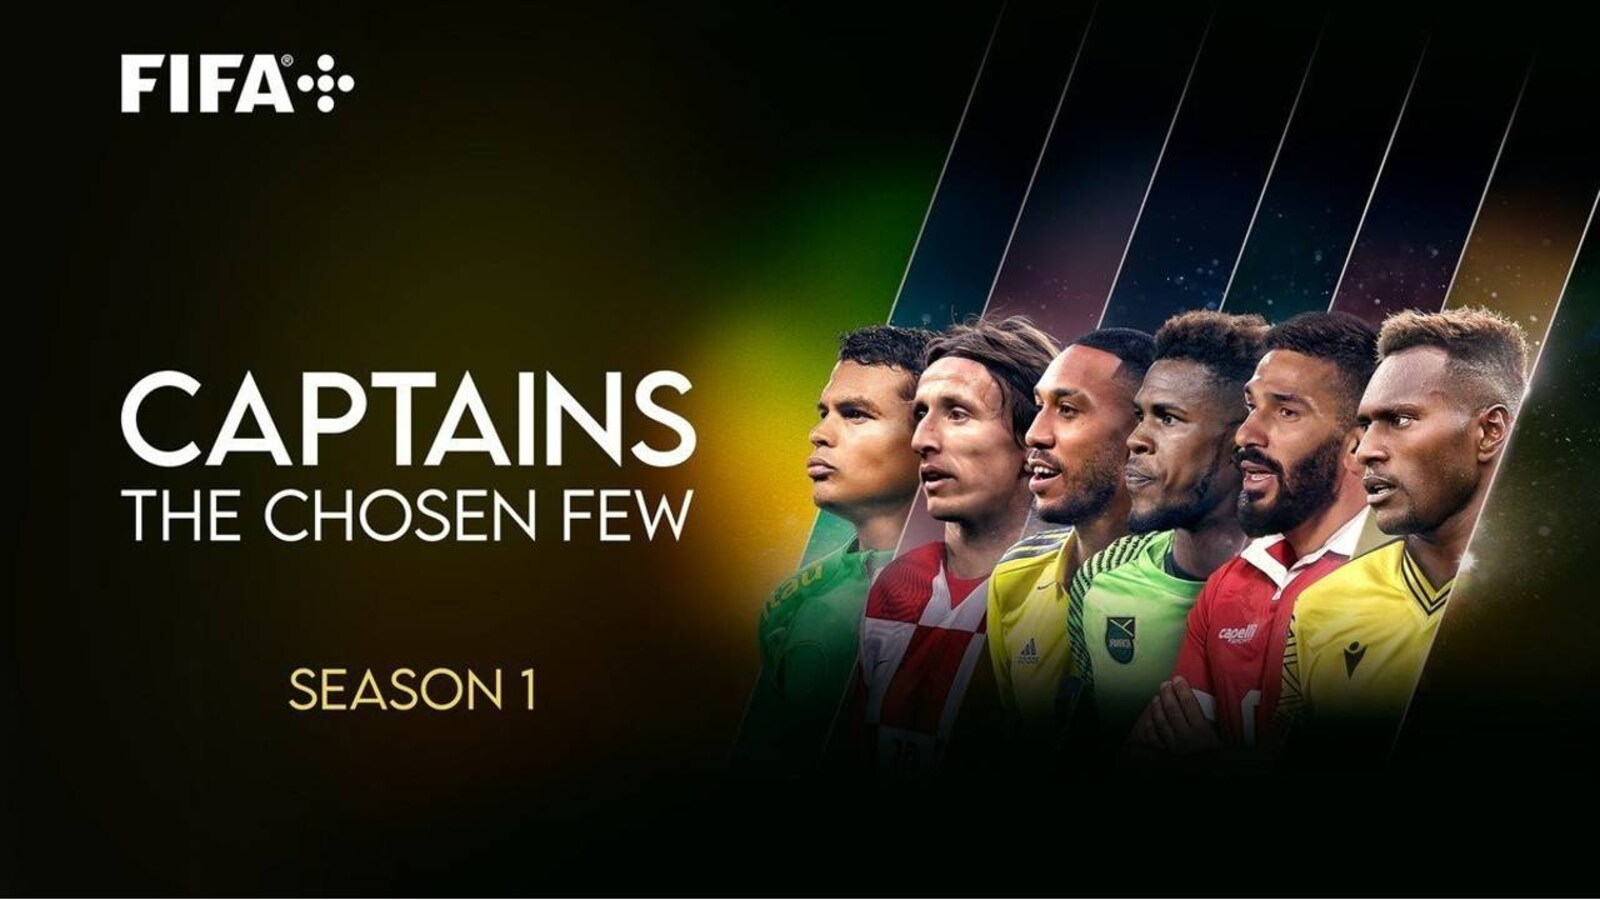 Netflix go 'access-all-areas at World Cup' with 'Captains' documentary